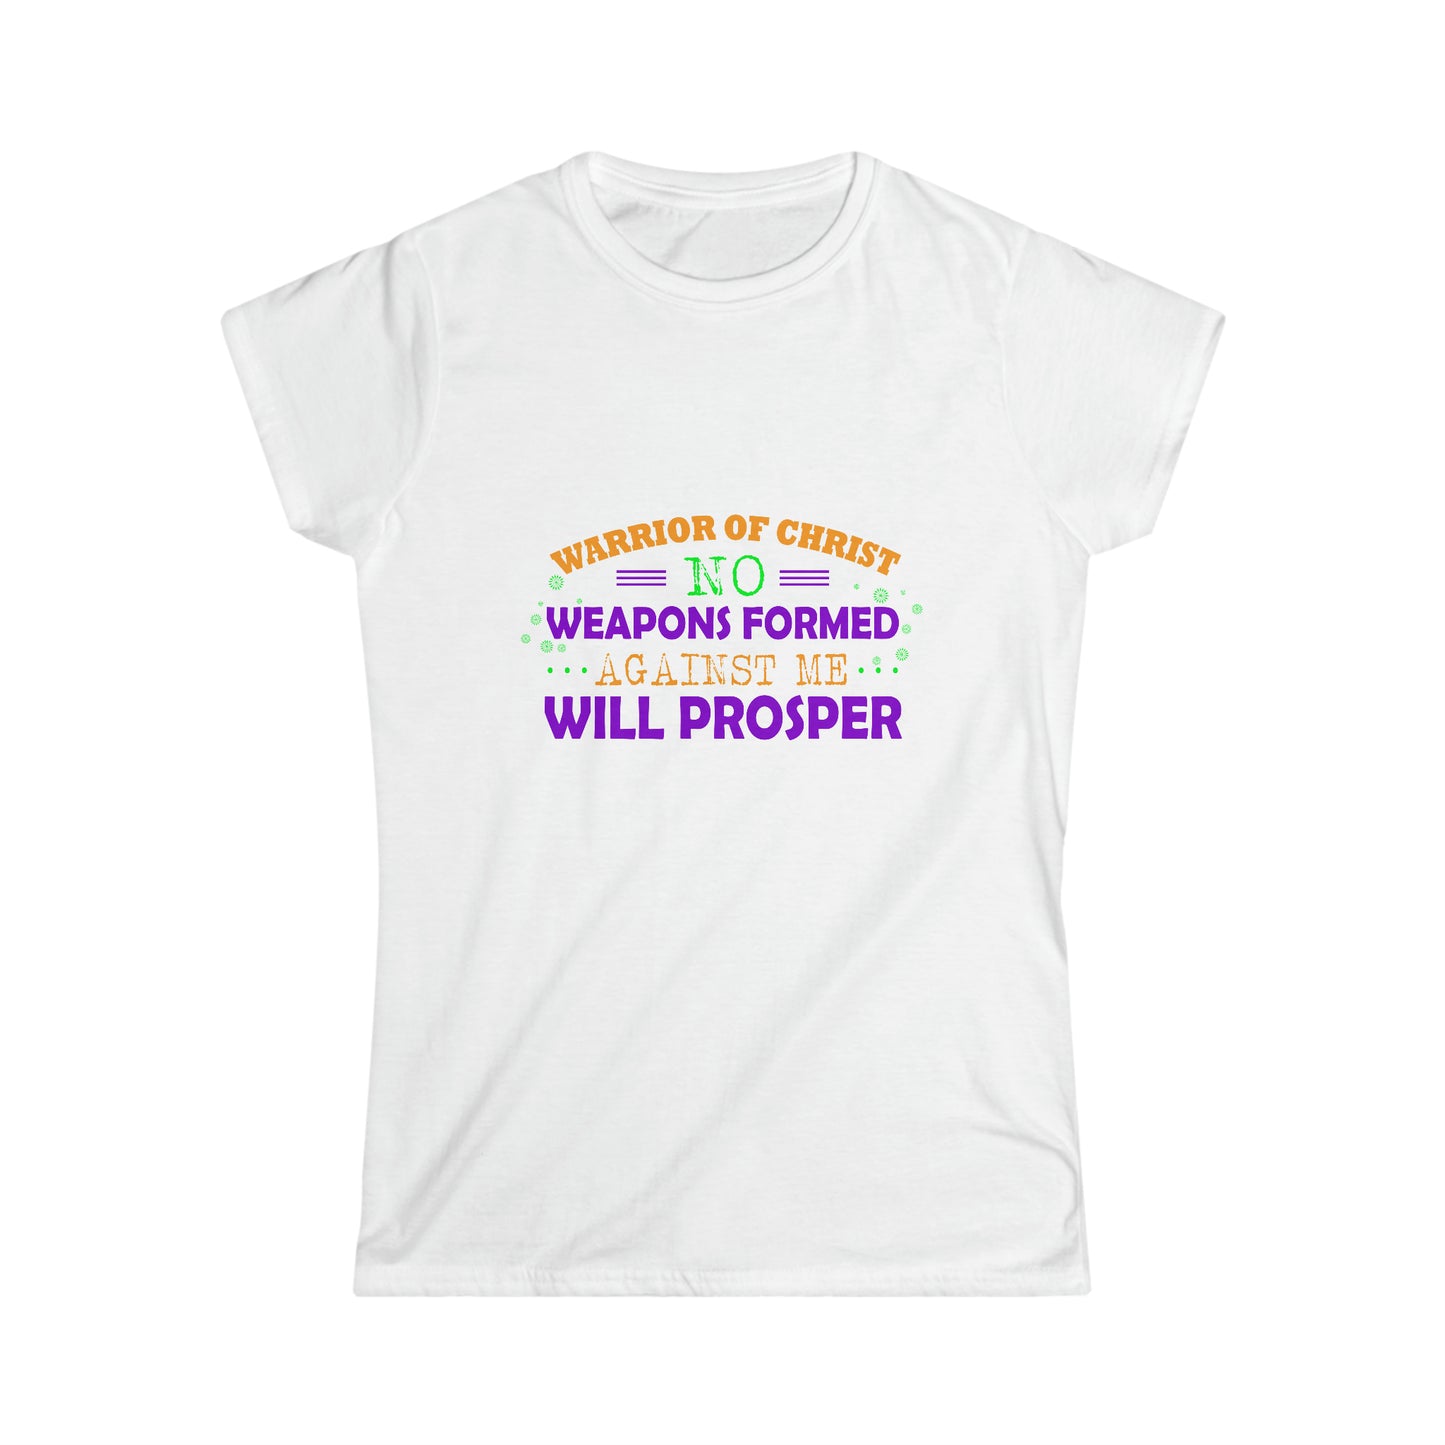 Warrior Of Christ No Weapons Formed Against Me Will Prosper Women's T-shirt